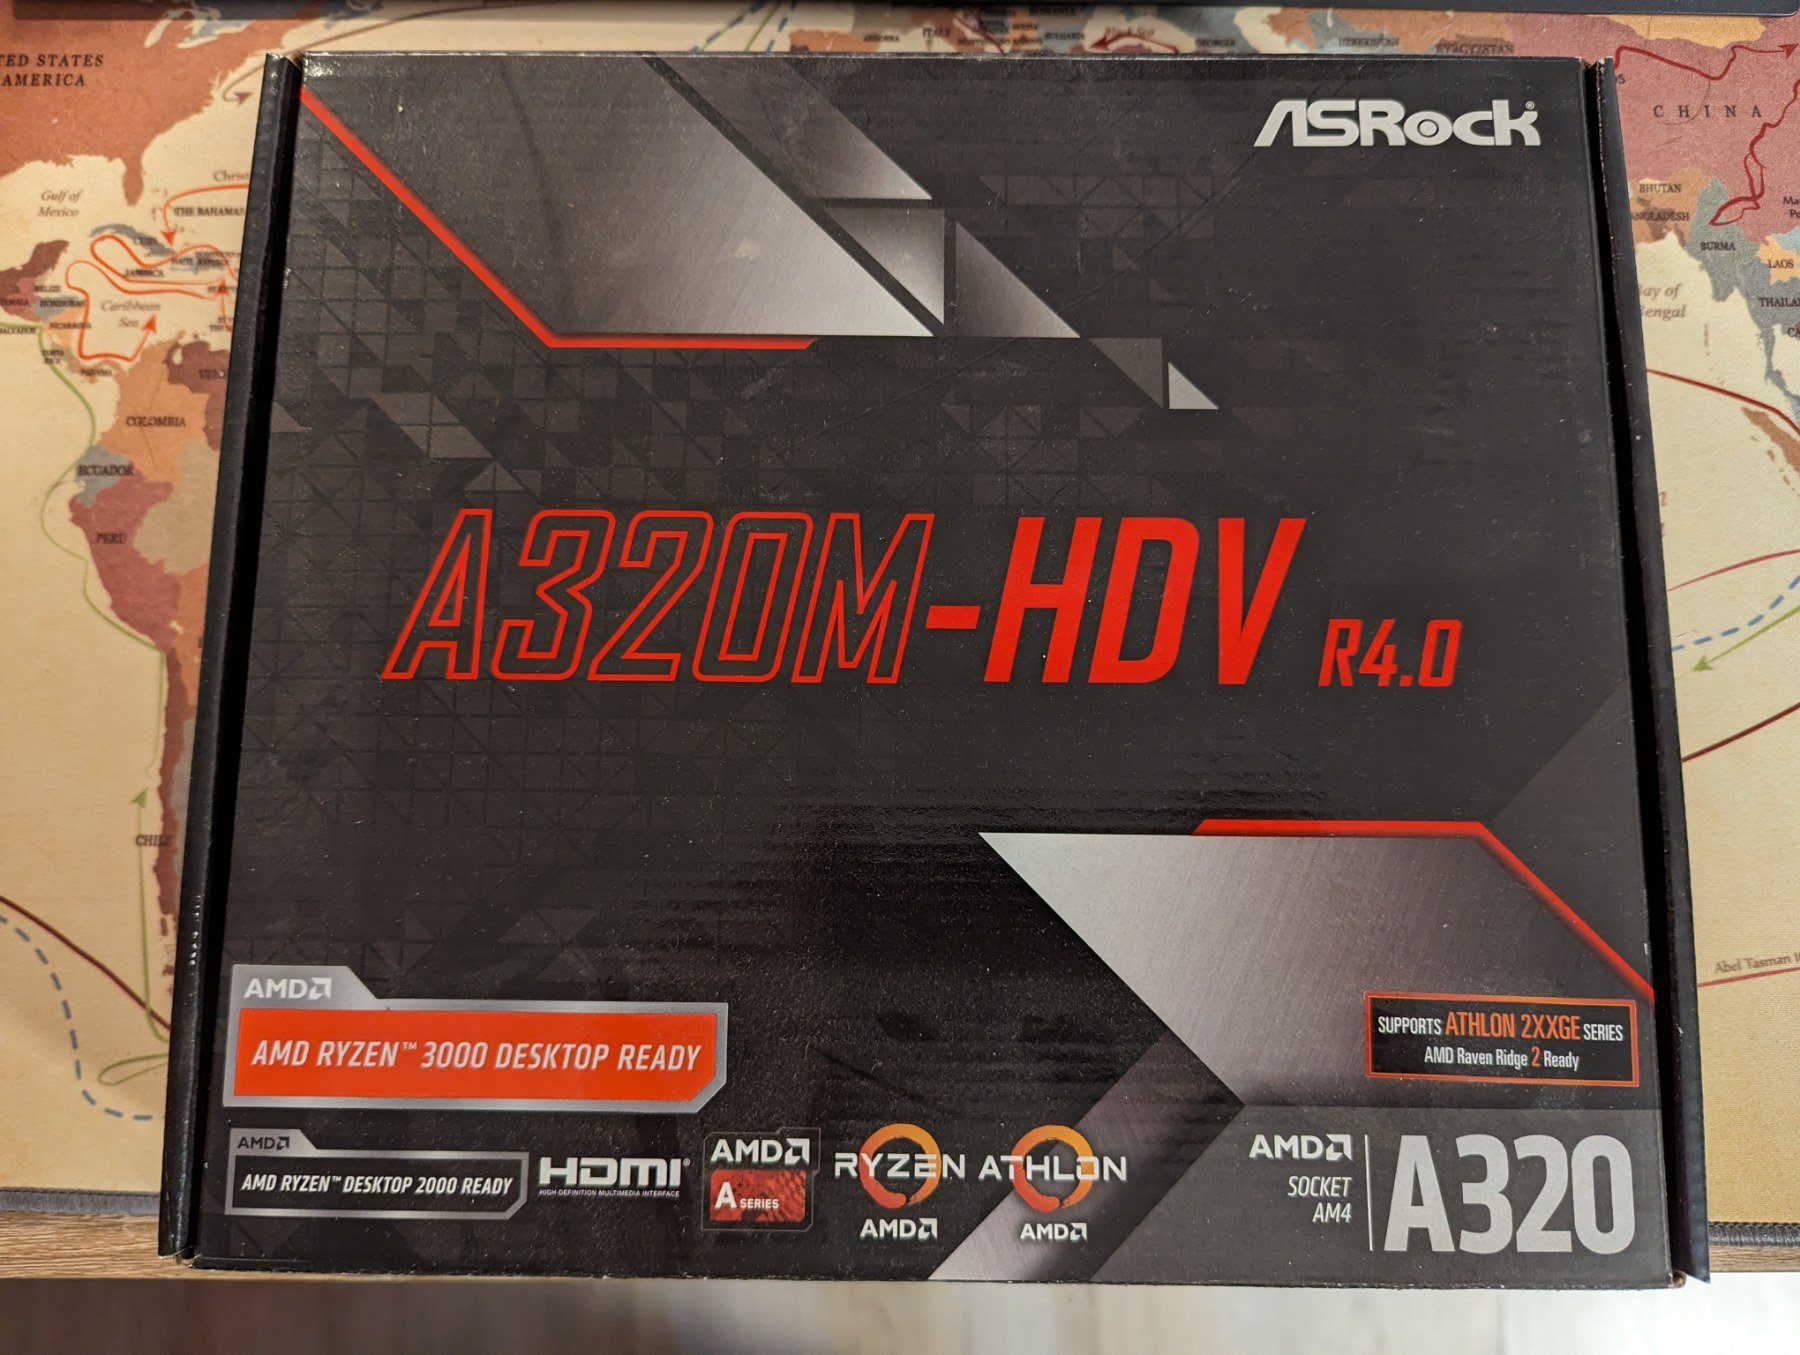 More information about "Πωλείται Asrock A320M-HDV R4.0"